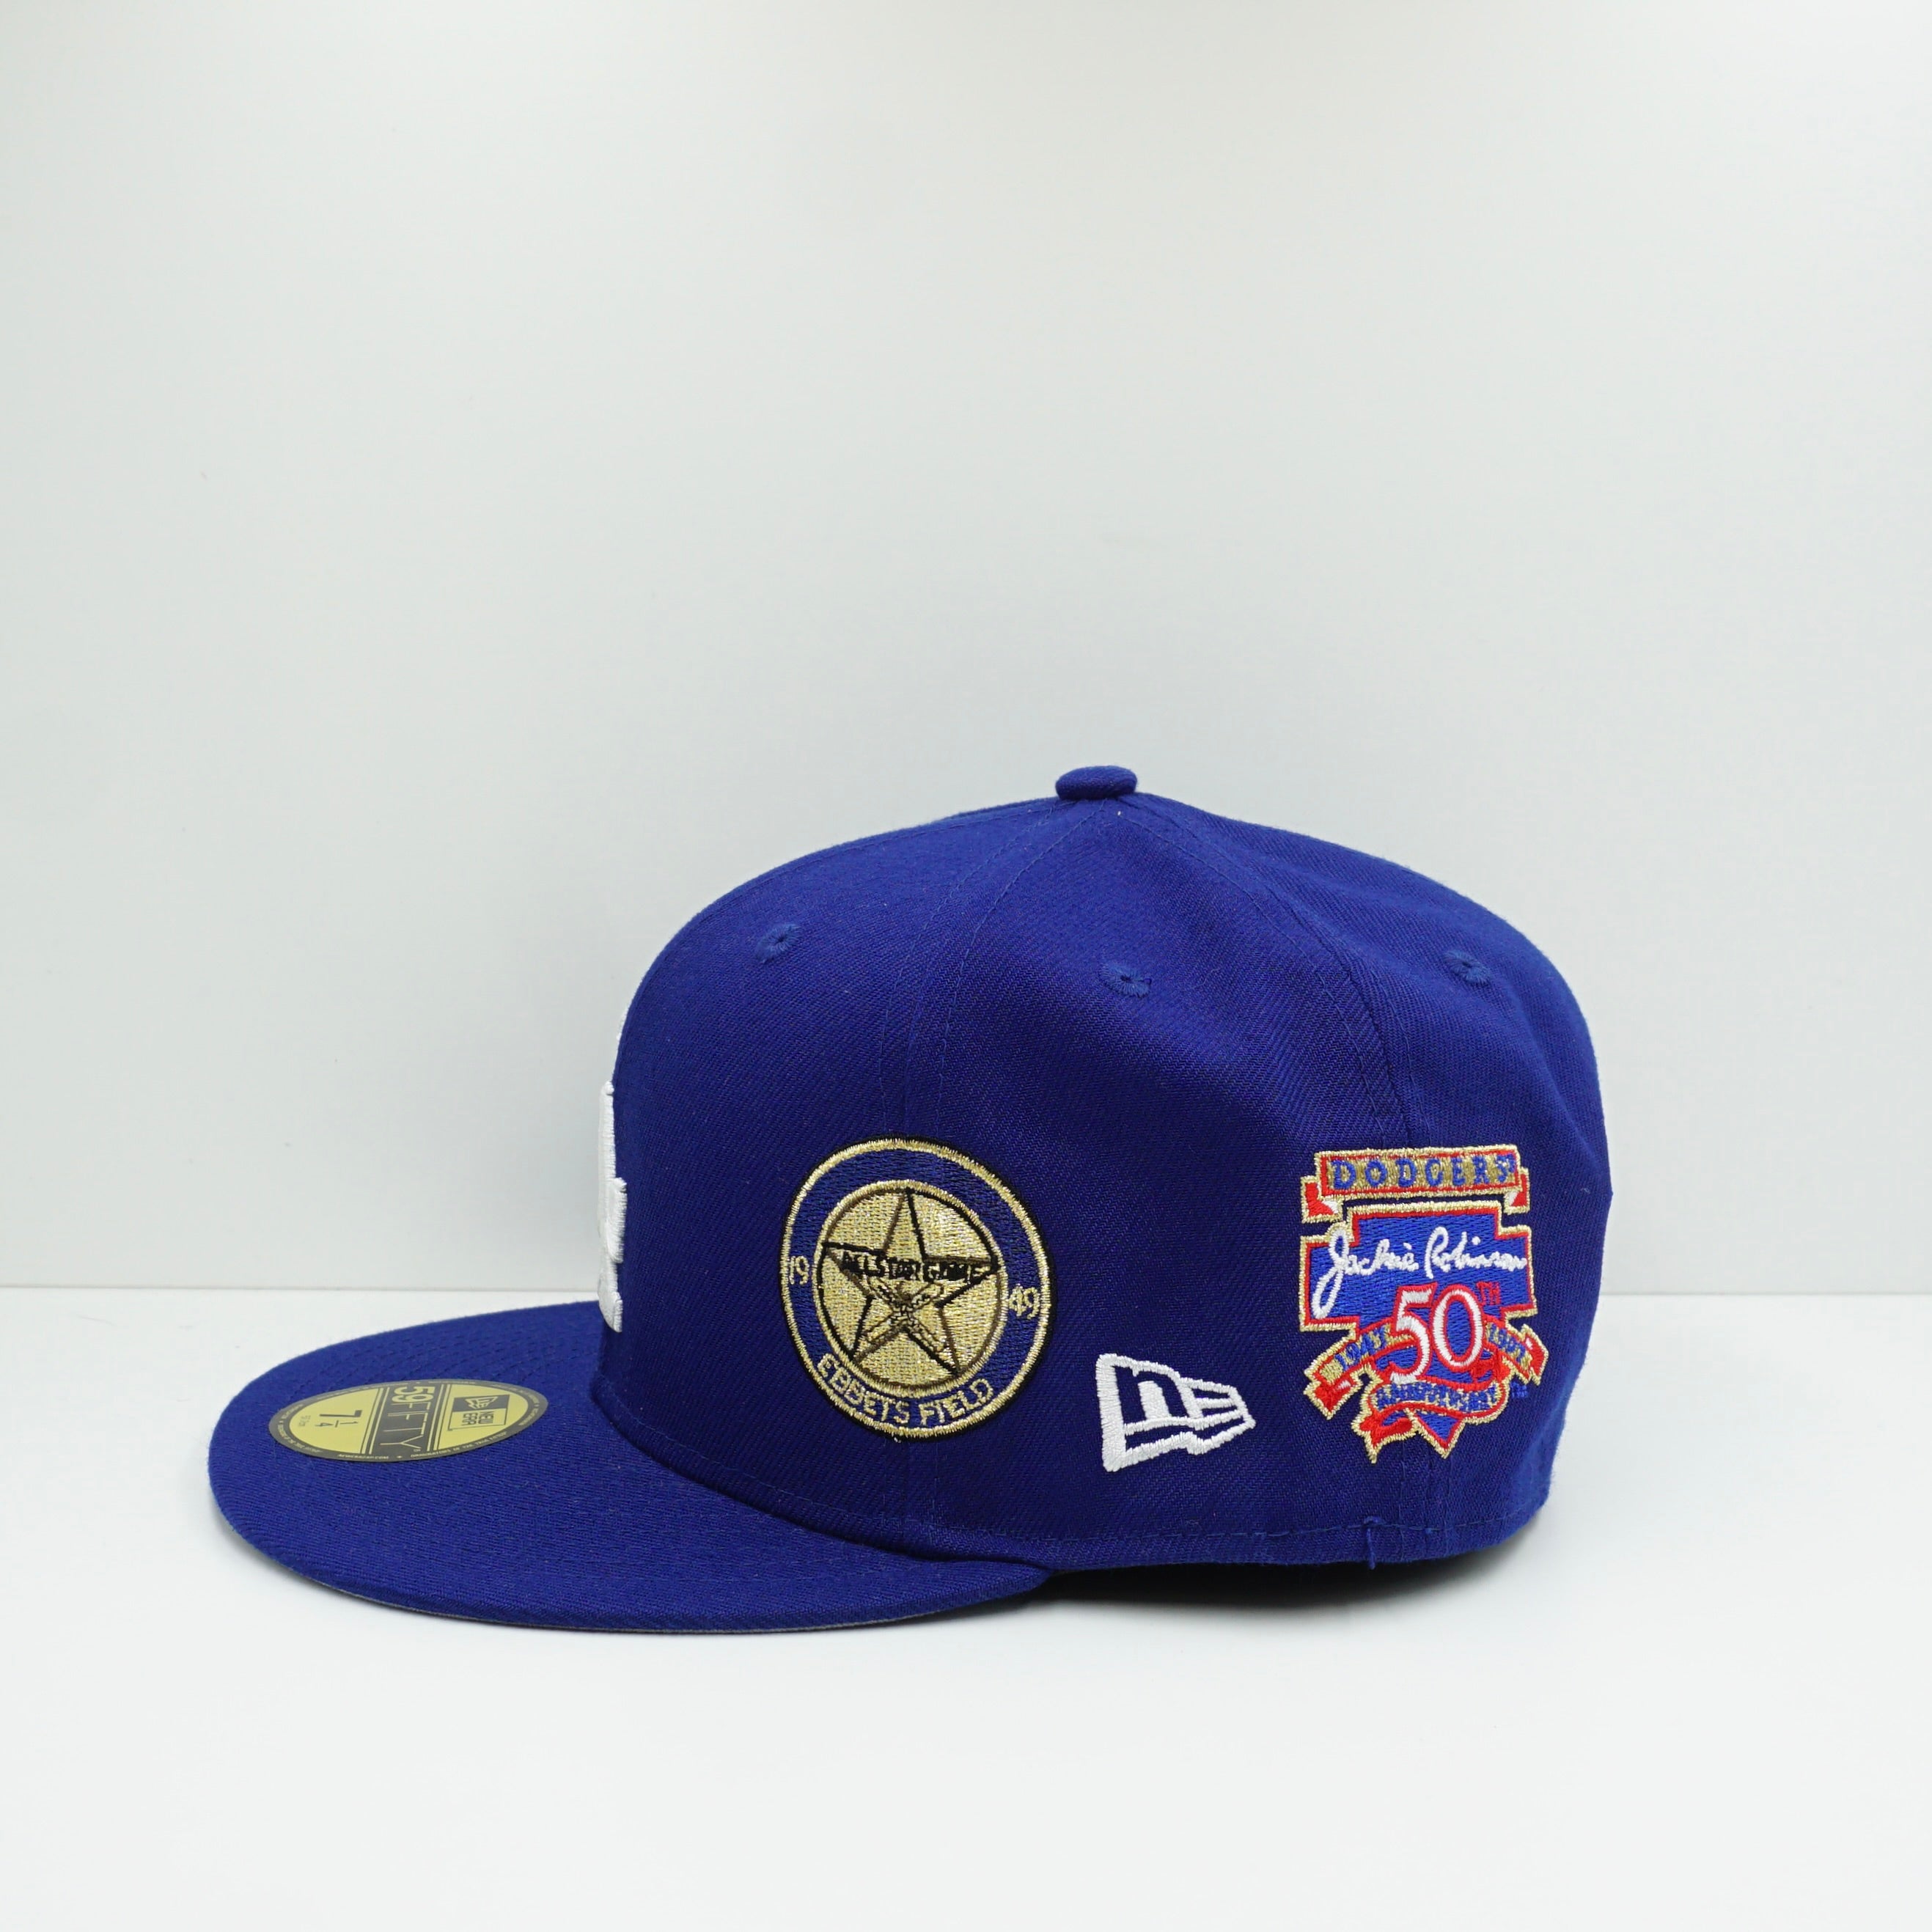 New Era Cooperstown Los Angeles Dodgers Multi Logo Fitted Cap